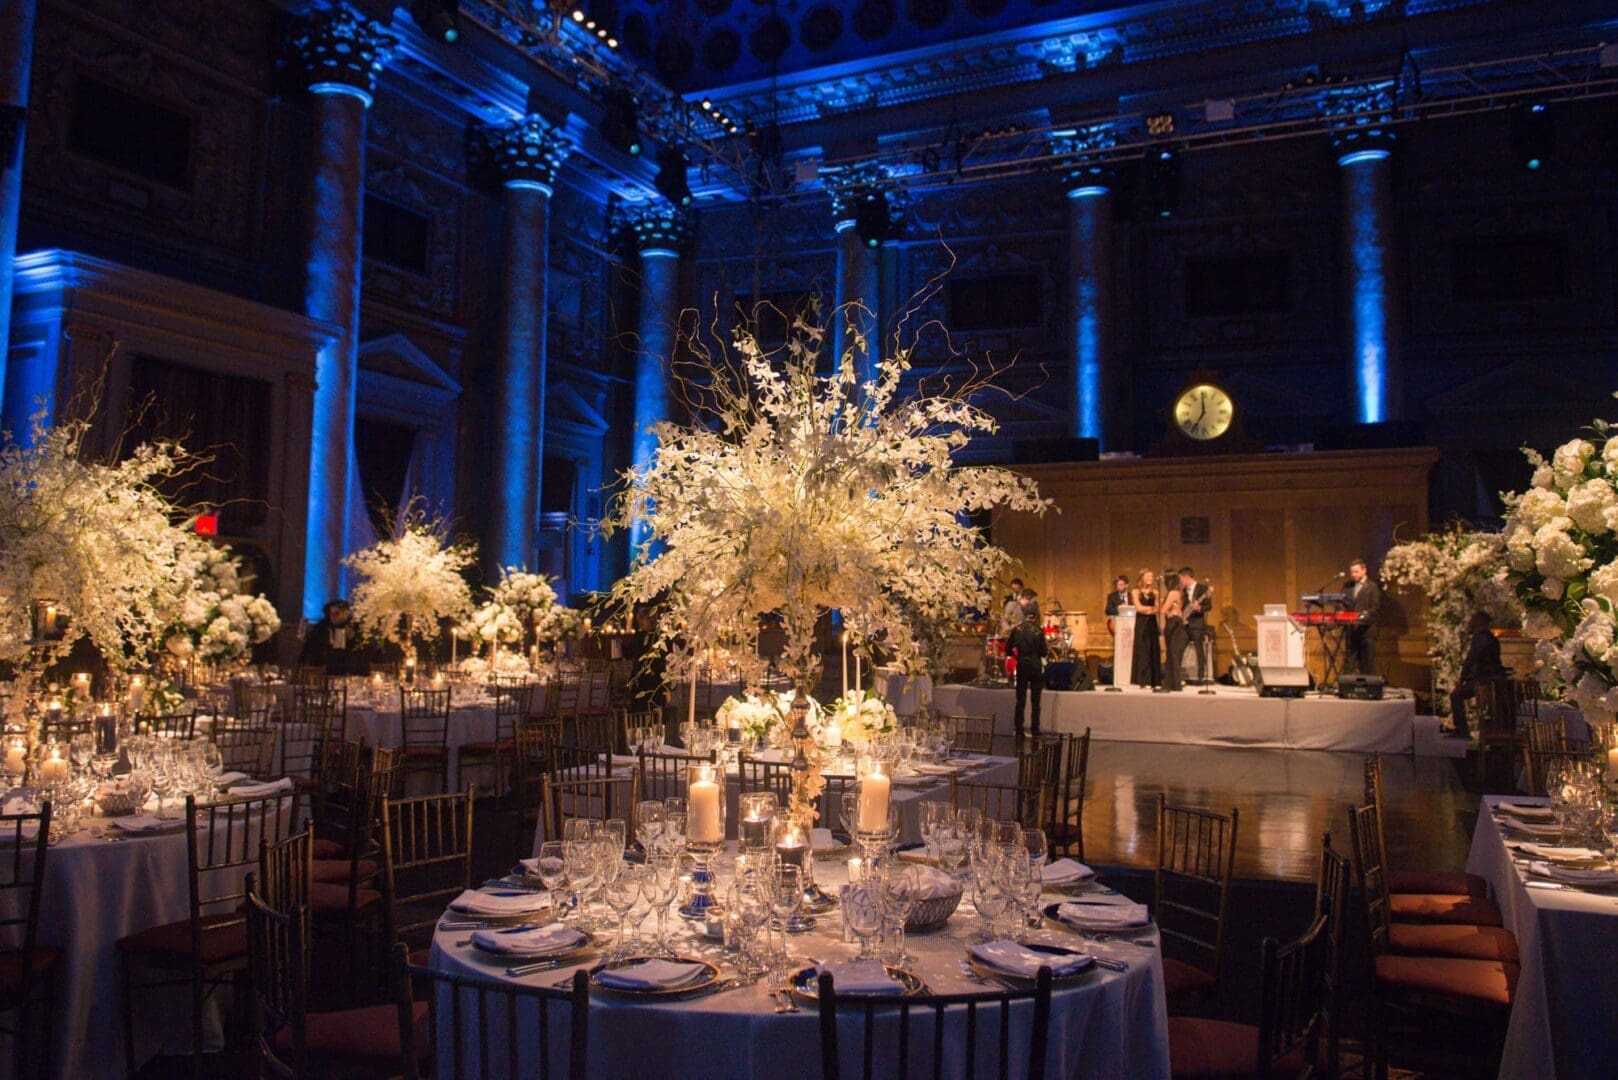 A wedding reception in a large ballroom with enchanting blue lighting and beautifully decorated tablescape ideas.